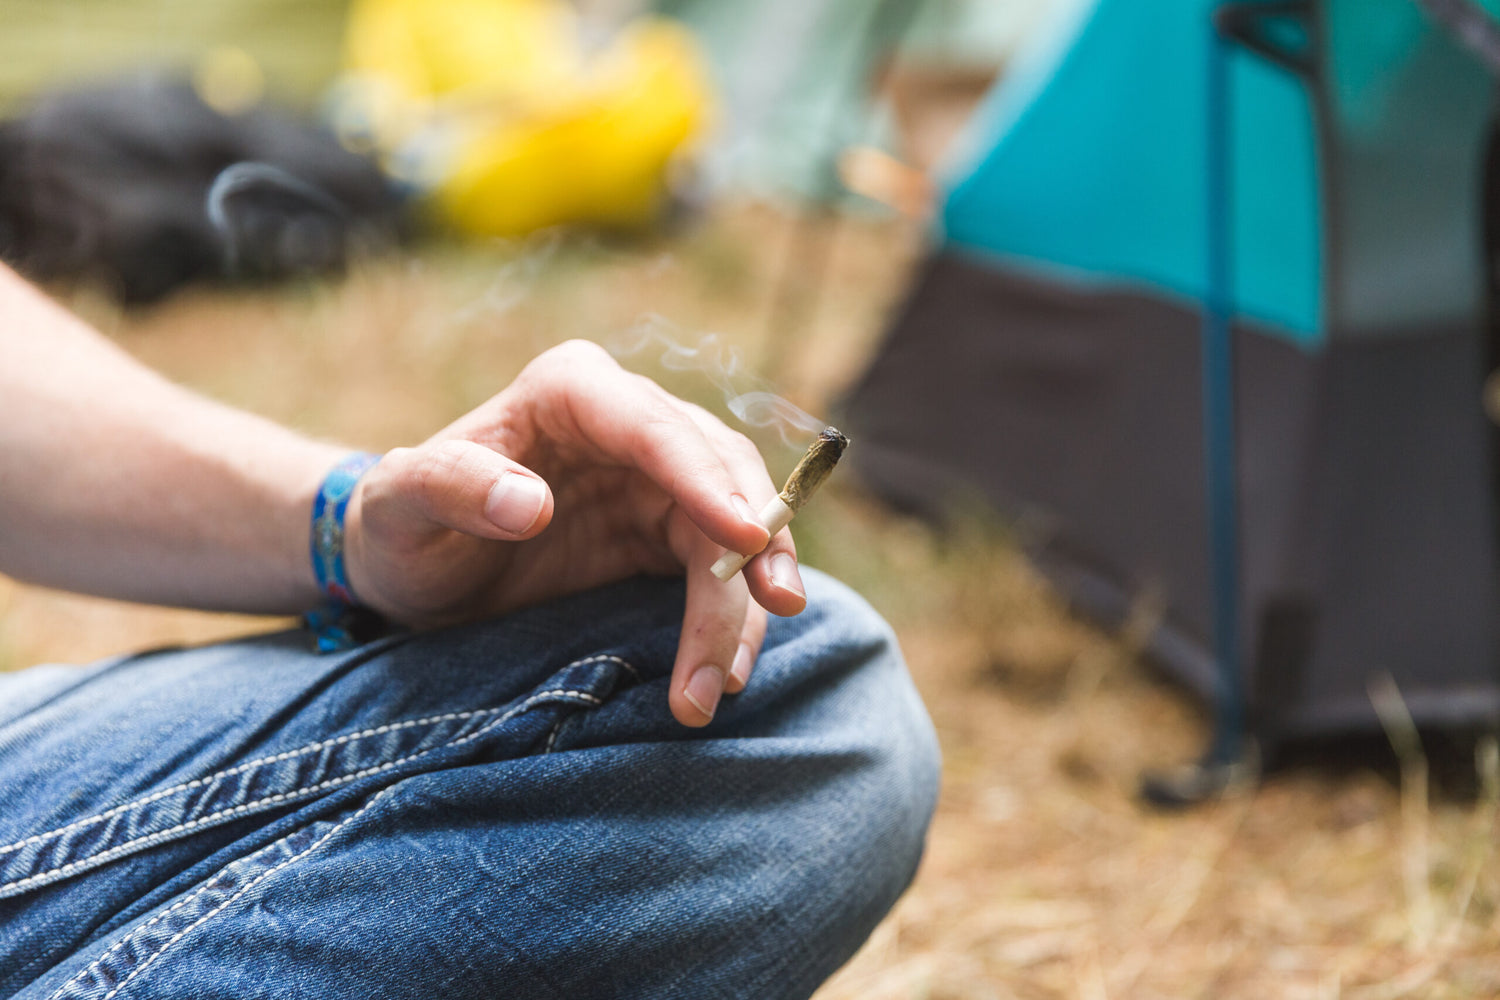 Cannabis Friendly Campground Opens In Harrison, Maine Due To Legal Loophole